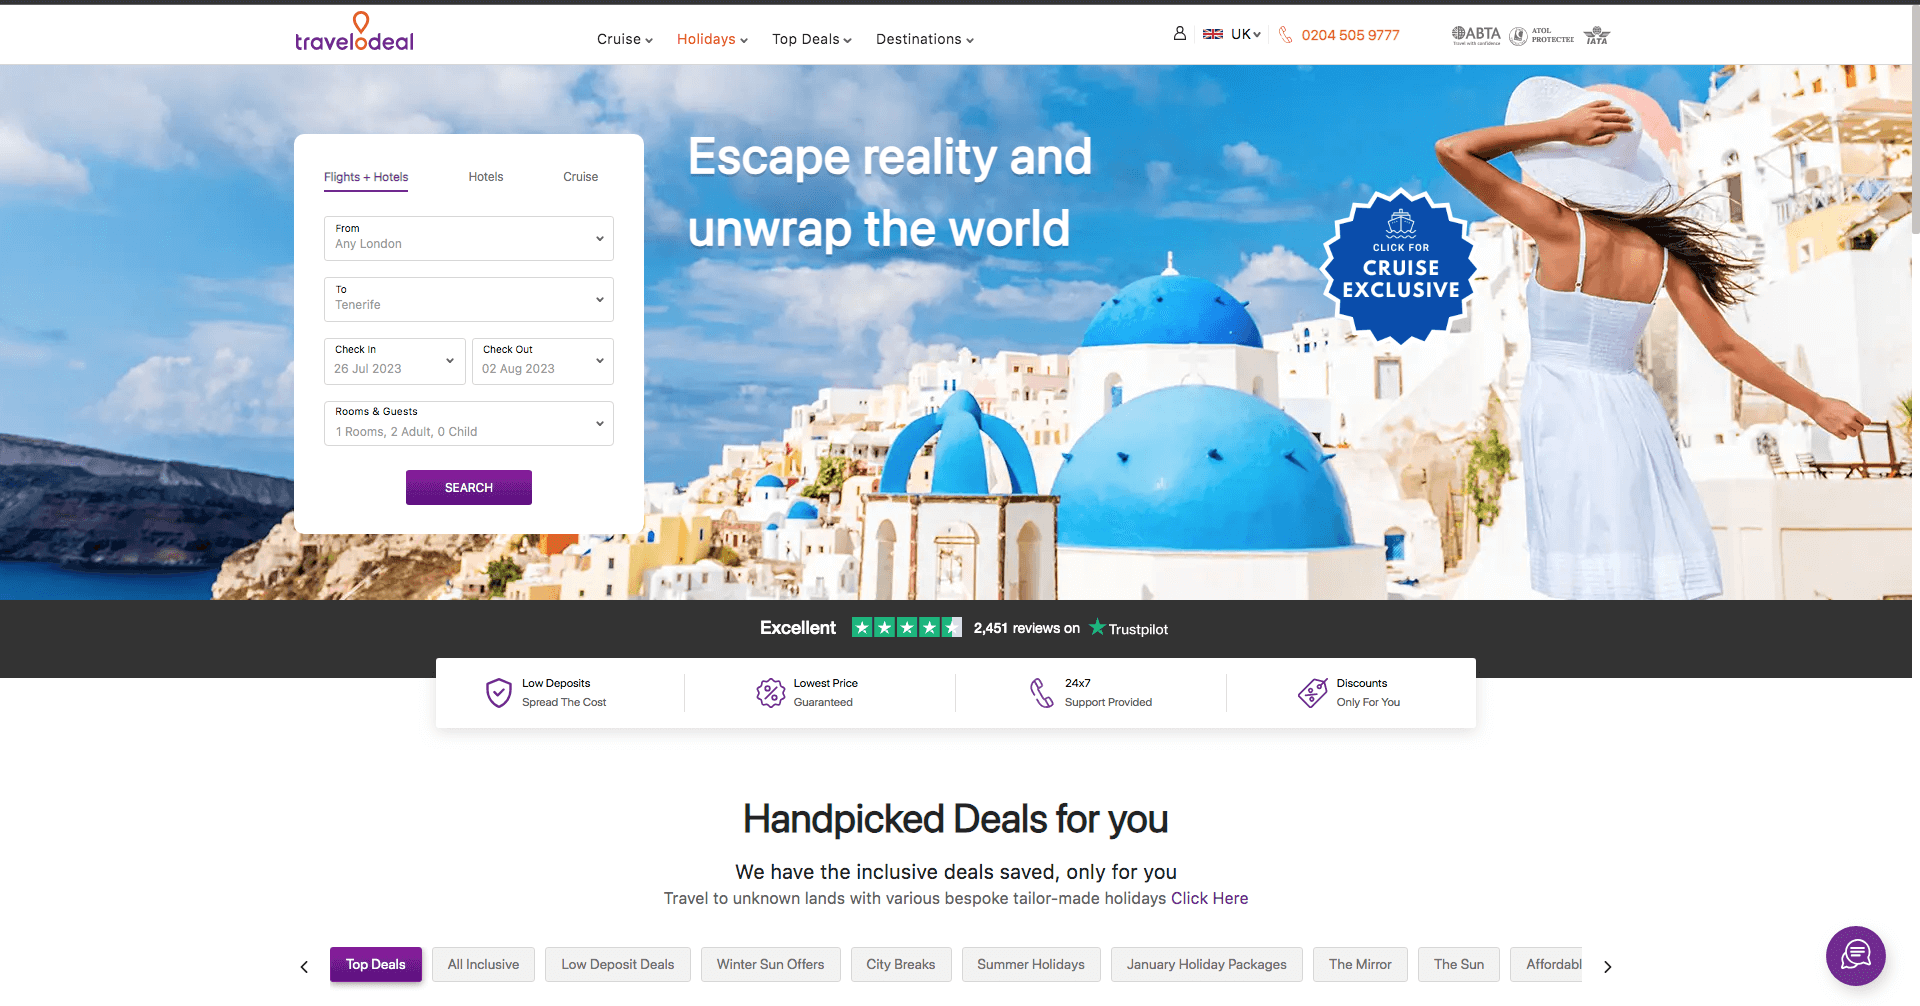 Limited Travelodeal